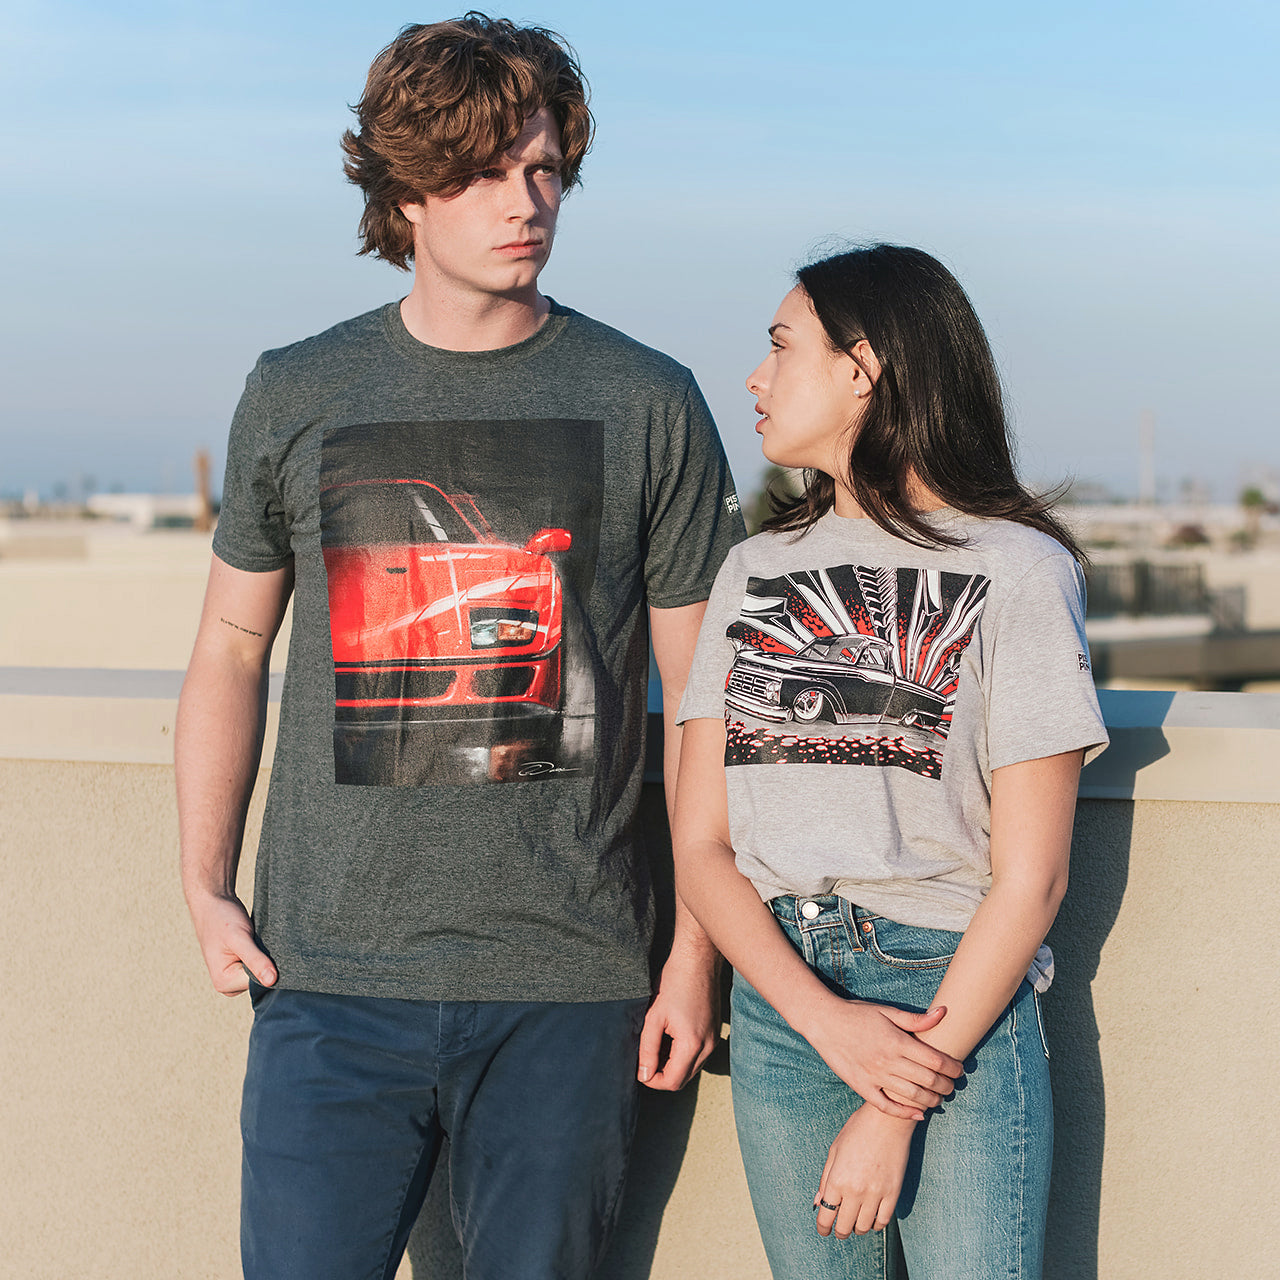 Air'd Out Grey Tee and F40 Dark Heather Tee Models